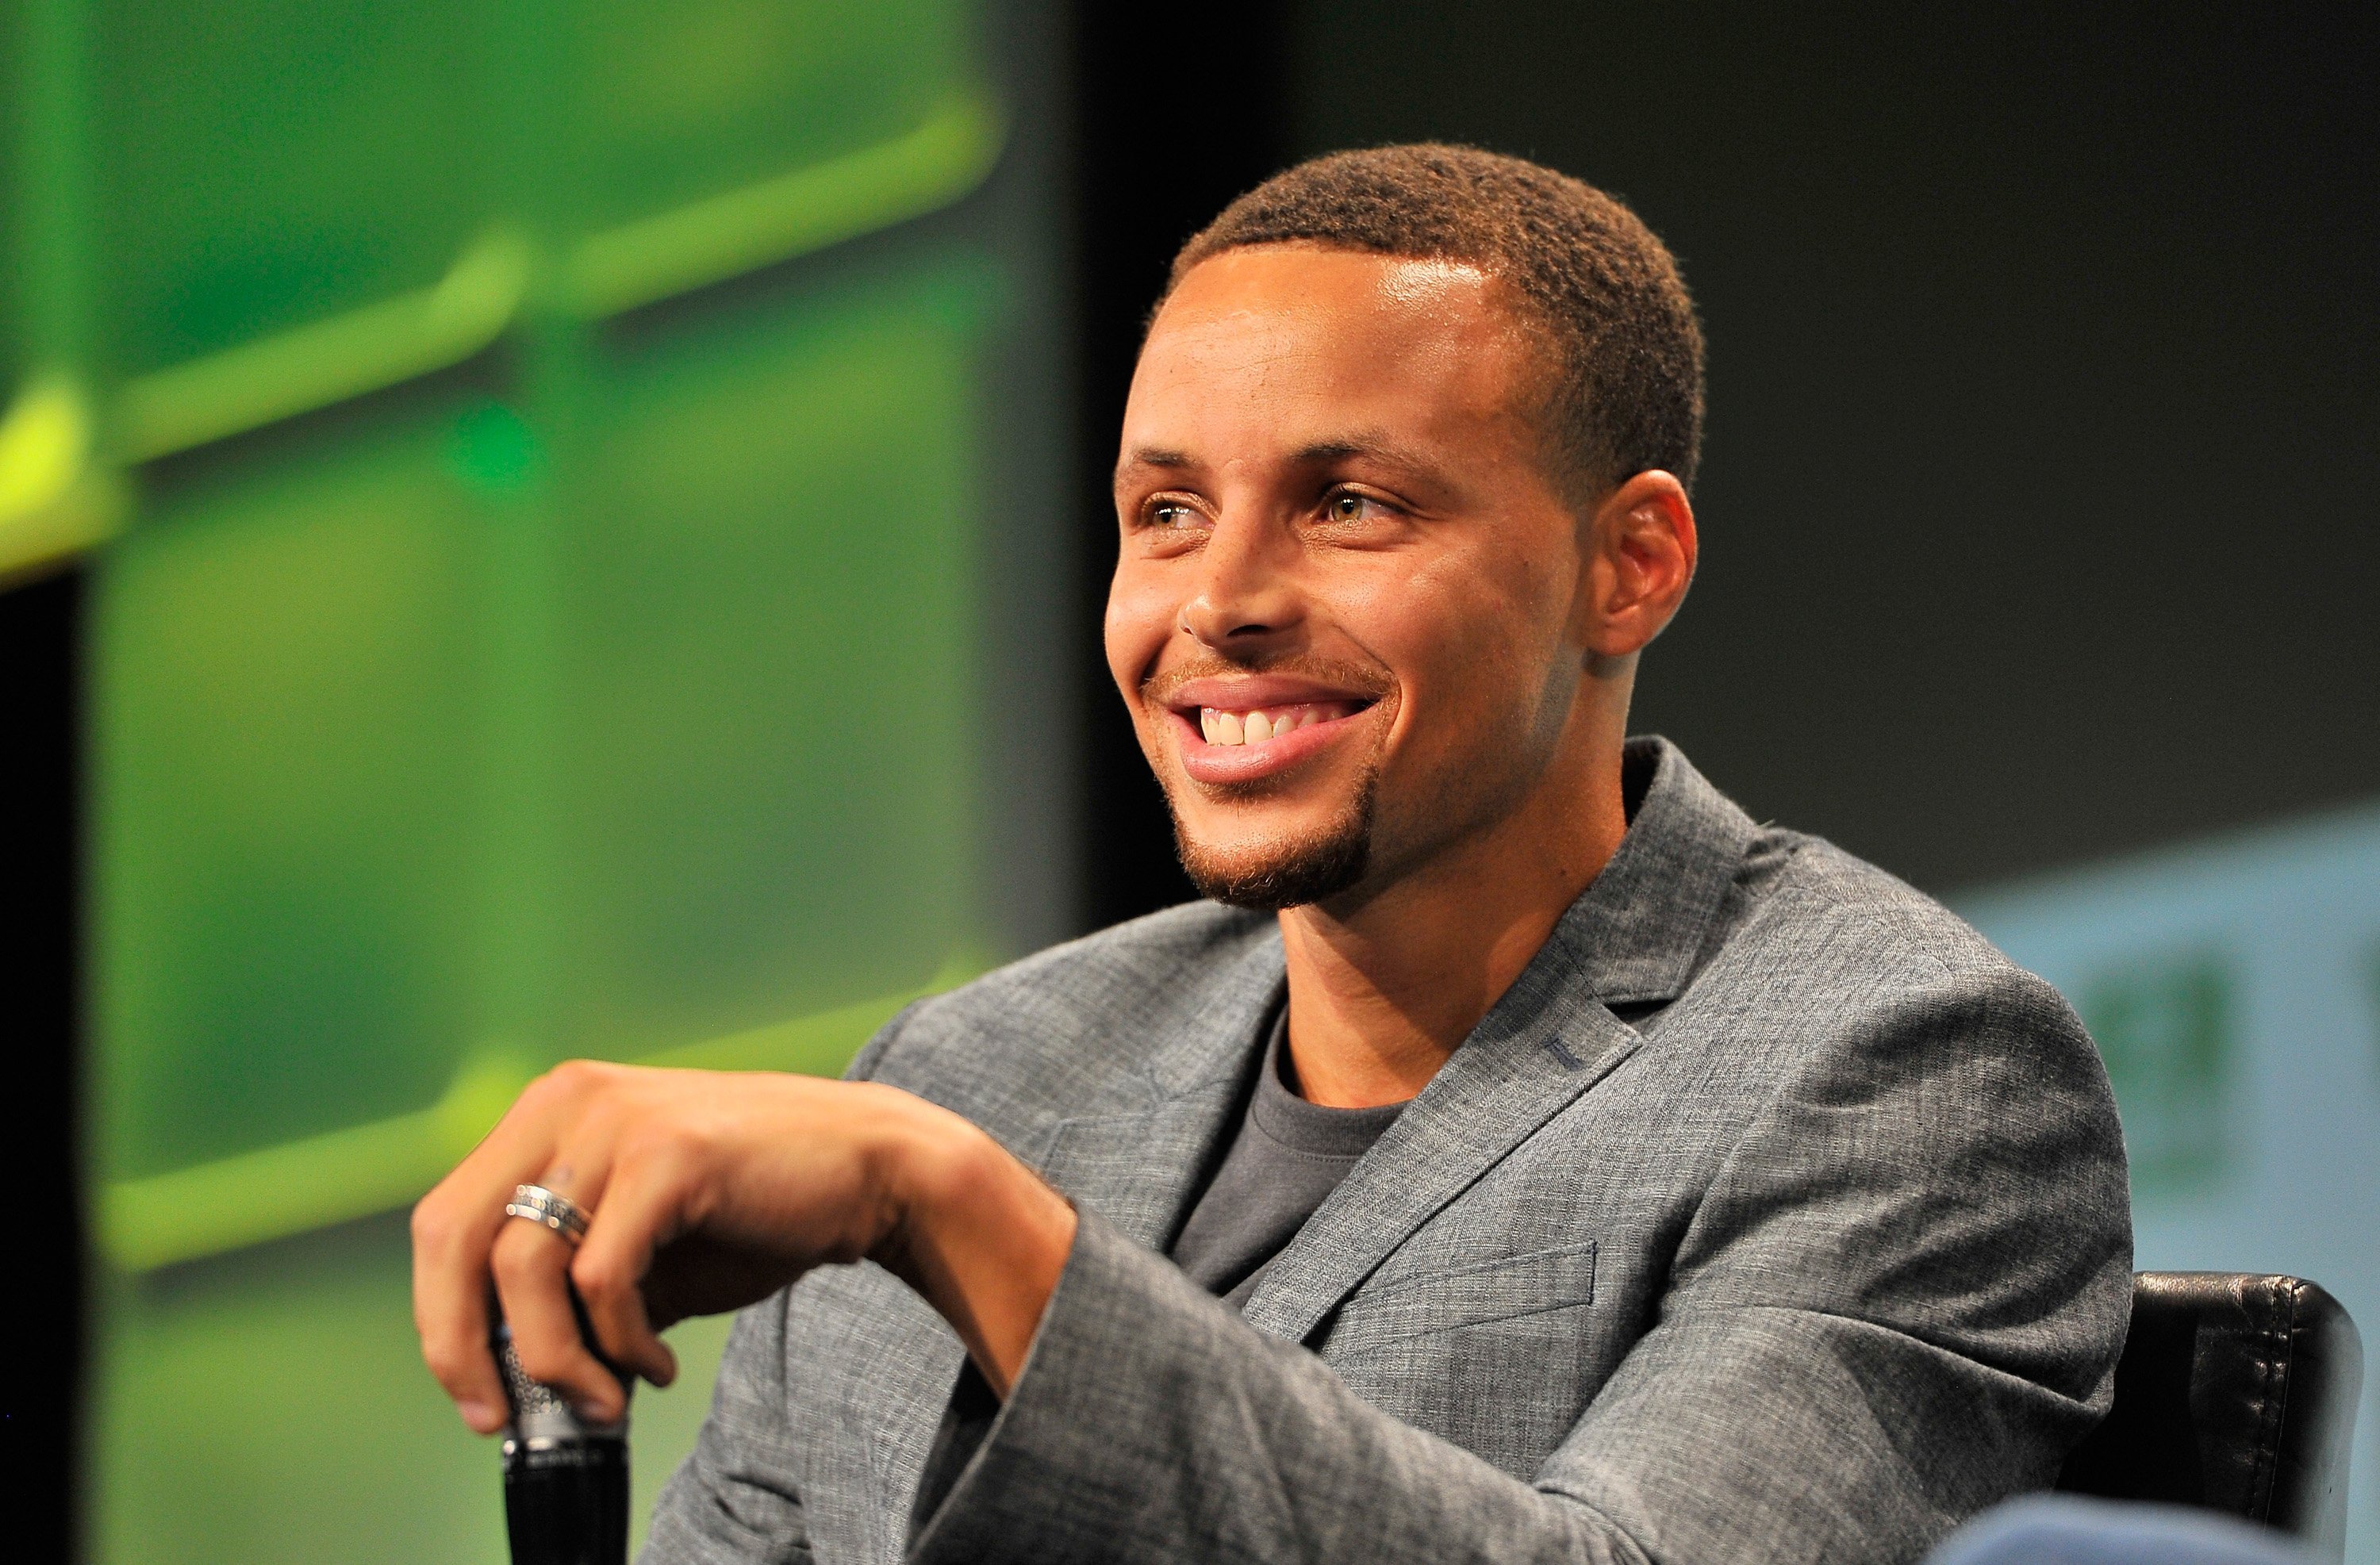 Stephen Curry onstage during the TechCrunch Disrupt SF 2016. | Photo: Getty Images